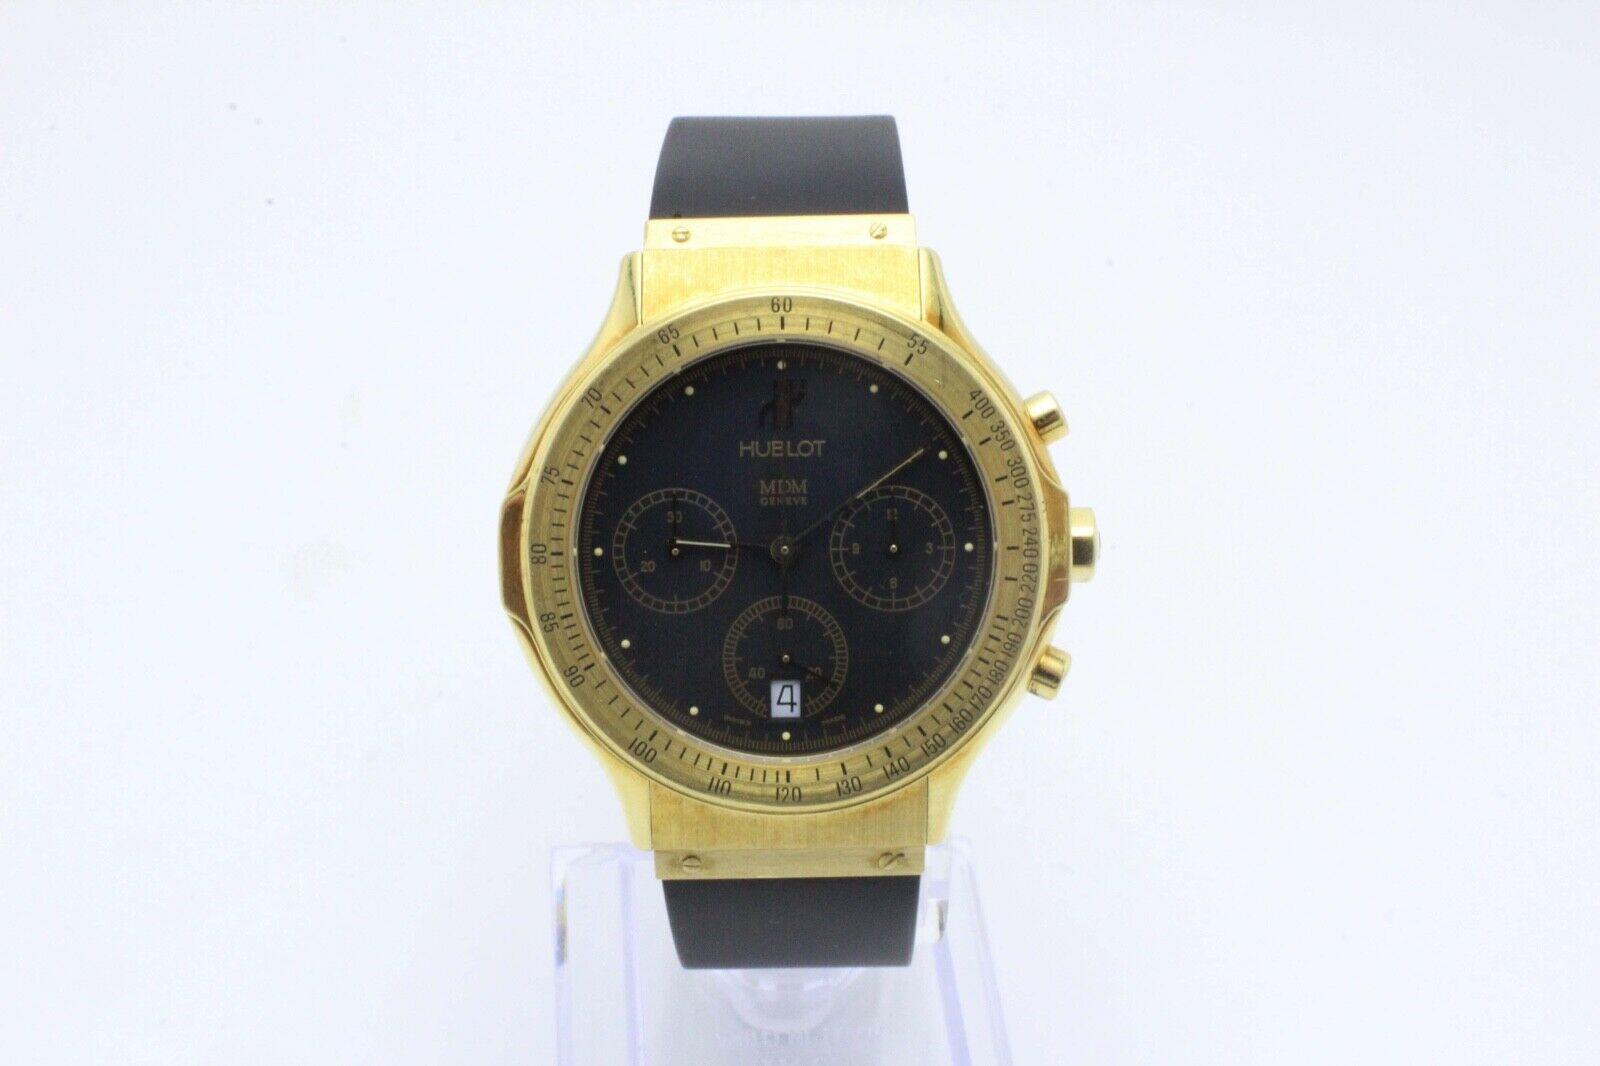 Style Number: 1621.3



Model: Hublot MDM Chronograph

 

Case Material: 18K Yellow Gold

 

Band: Black Rubber

 

Bezel:  18K Yellow Gold

 

Dial: Black

 

Face: Sapphire Crystal

 

Case Size: 36mm

 

Includes: 

-Elegant Watch Box & Hublot